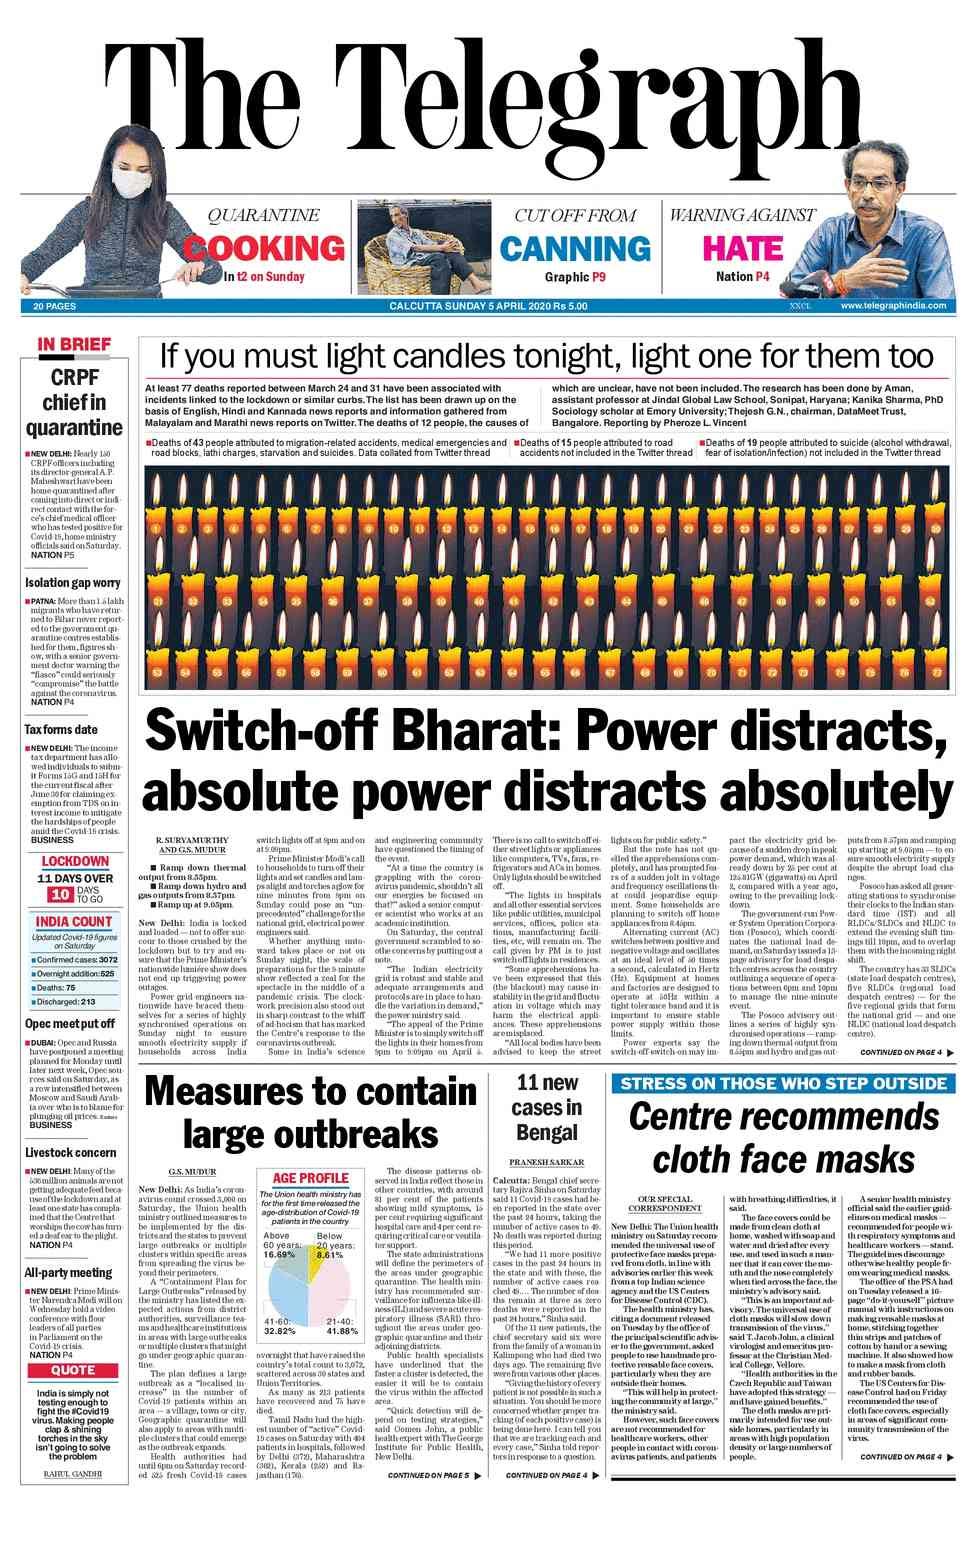 Coronavirus Lockdown, Plight Of Migrant Labourers And Other Top Stories On Sunday